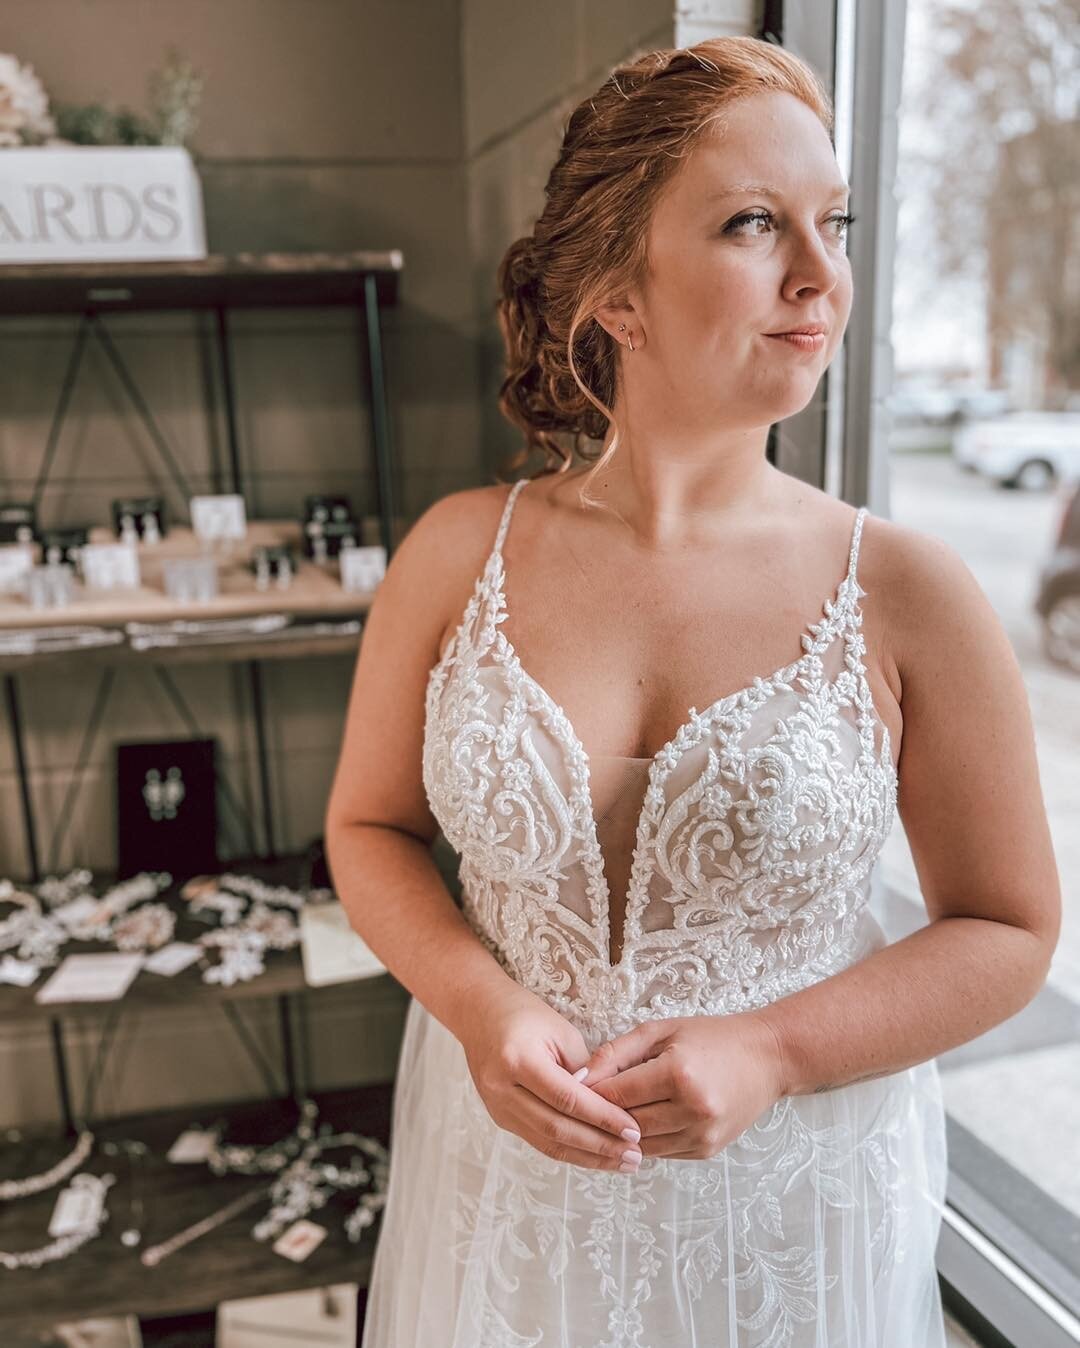 Vintage lace and bridal glam come together beautifully in D3324 from Essense of Australia!🤩✨

#wildrosebridal